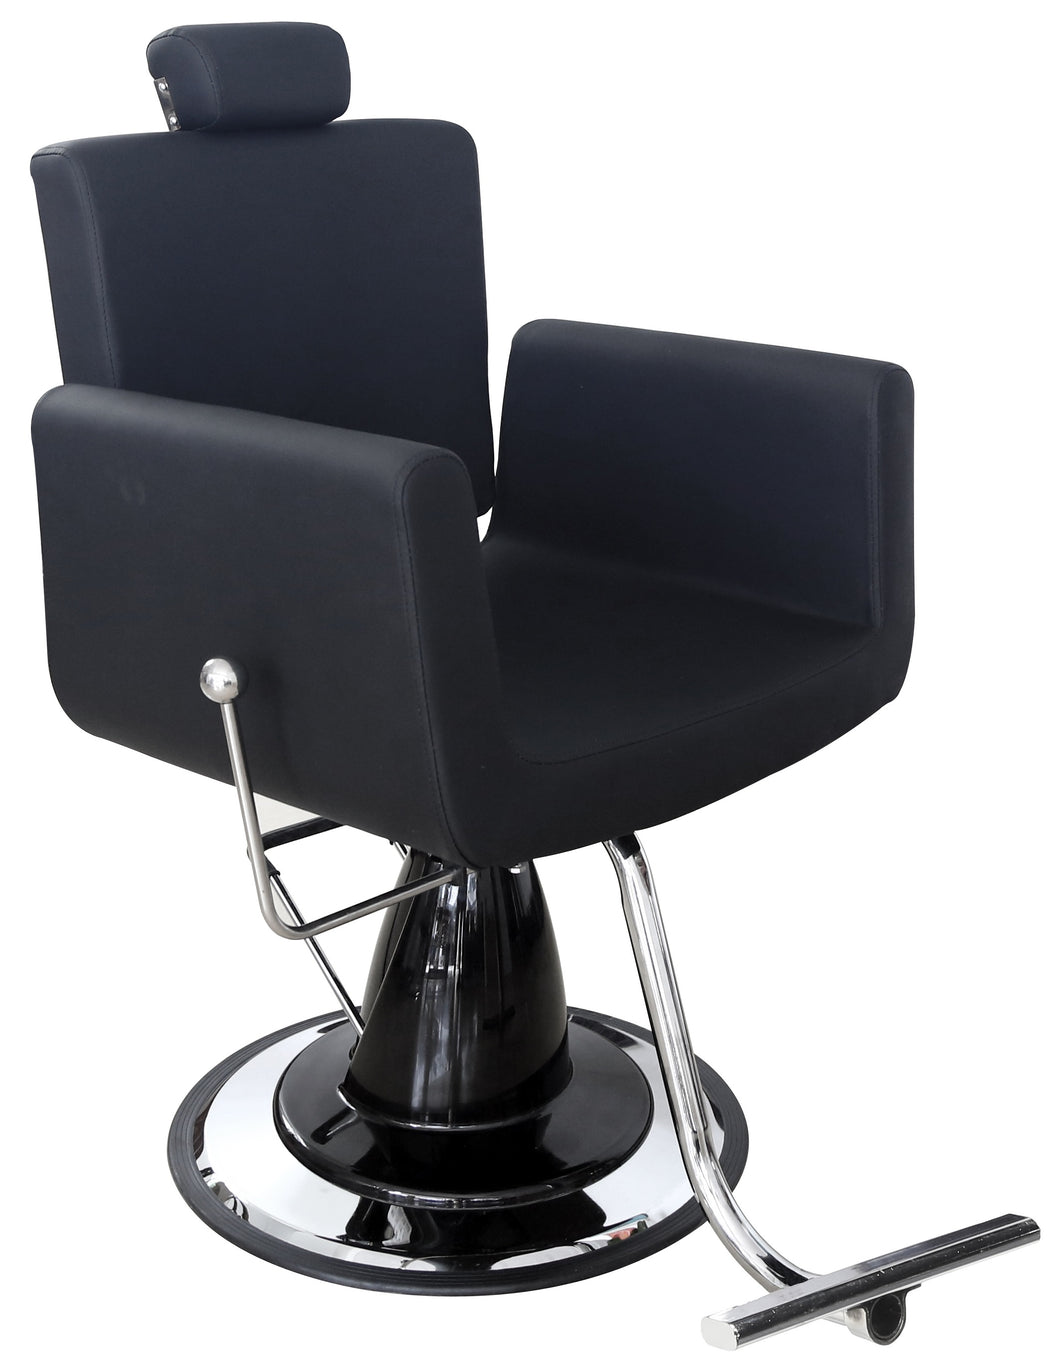 Model 9225 All Purpose Salon Chair, Hydraulic Adjustable Height, Reclinable Back Support